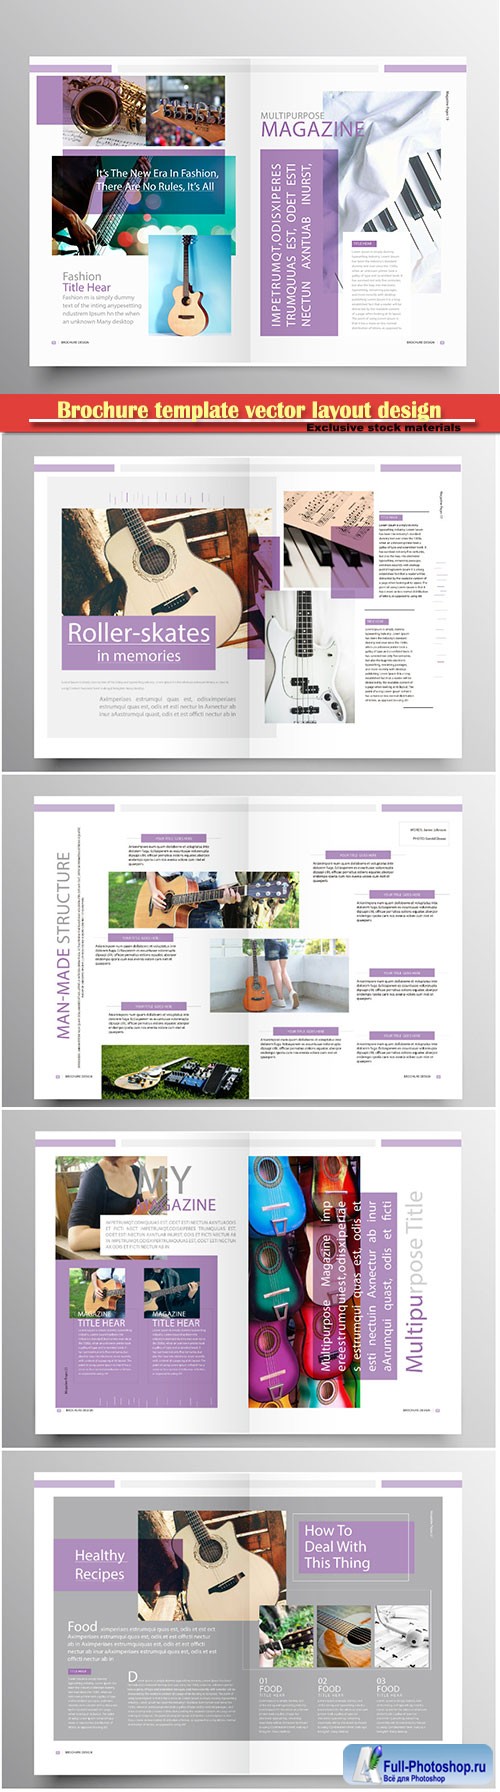 Brochure template vector layout design, corporate business annual report, magazine, flyer mockup # 182